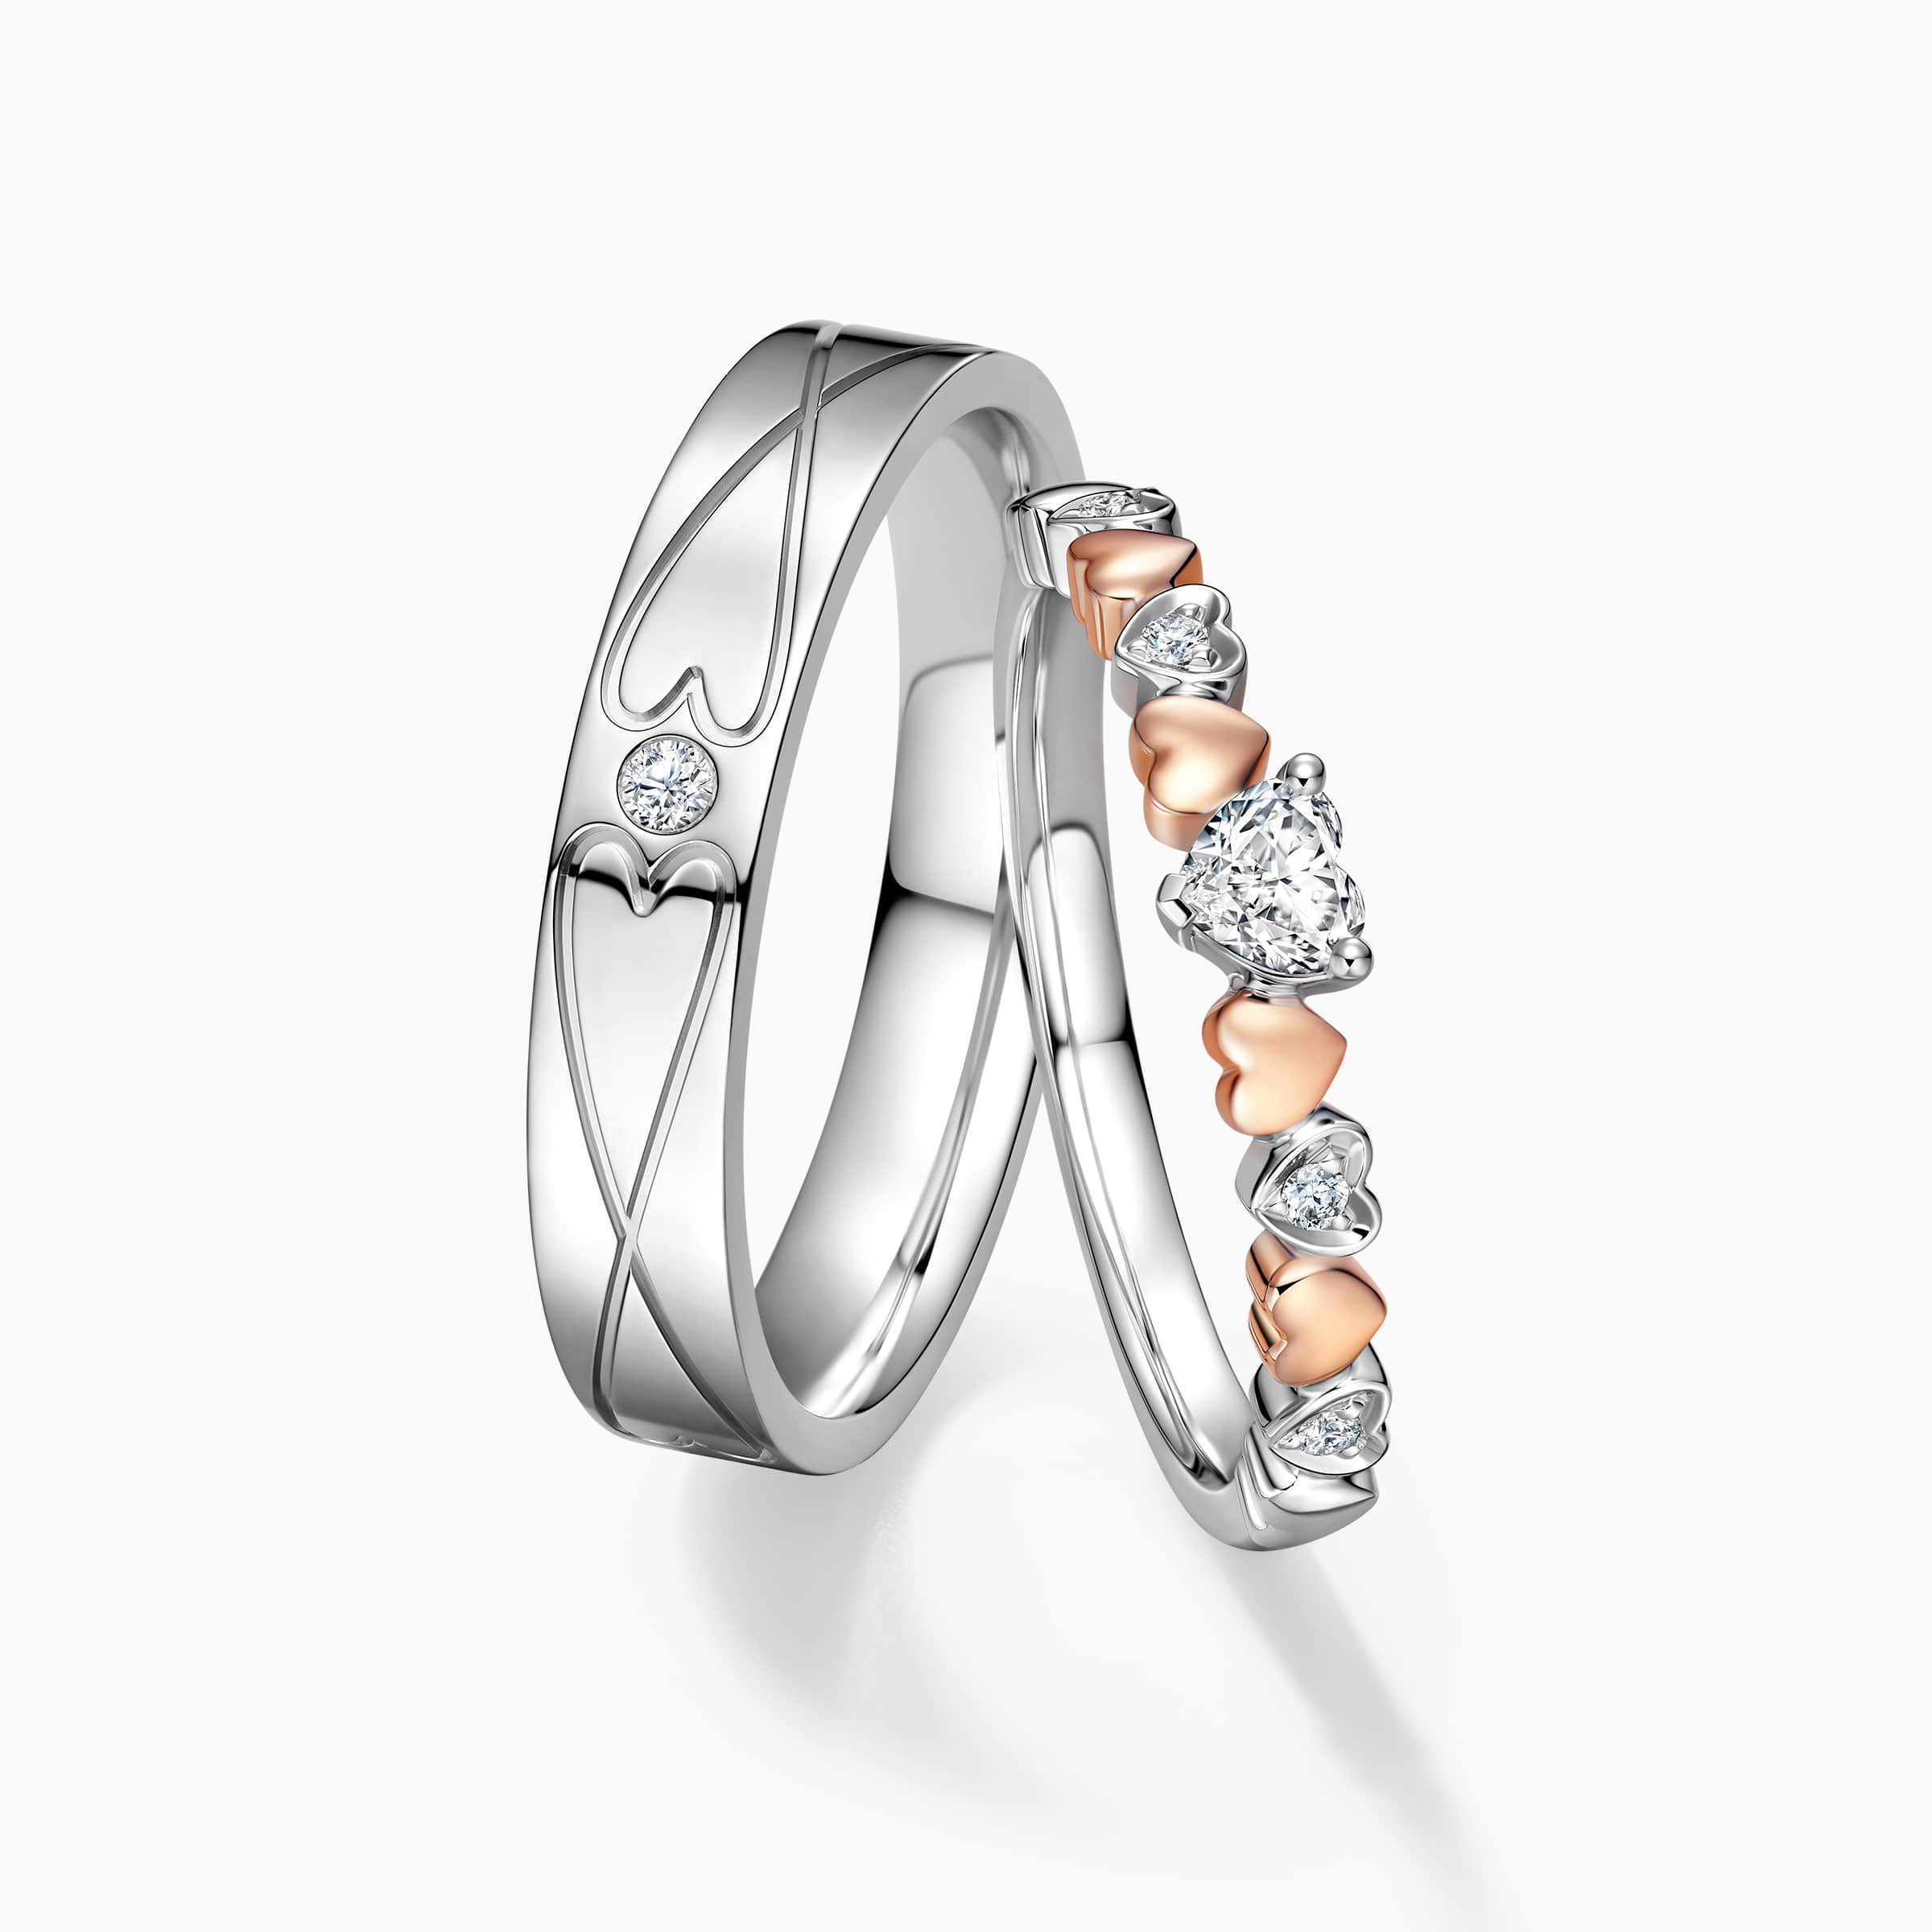 Darry Ring heart wedding rings set for man and woman